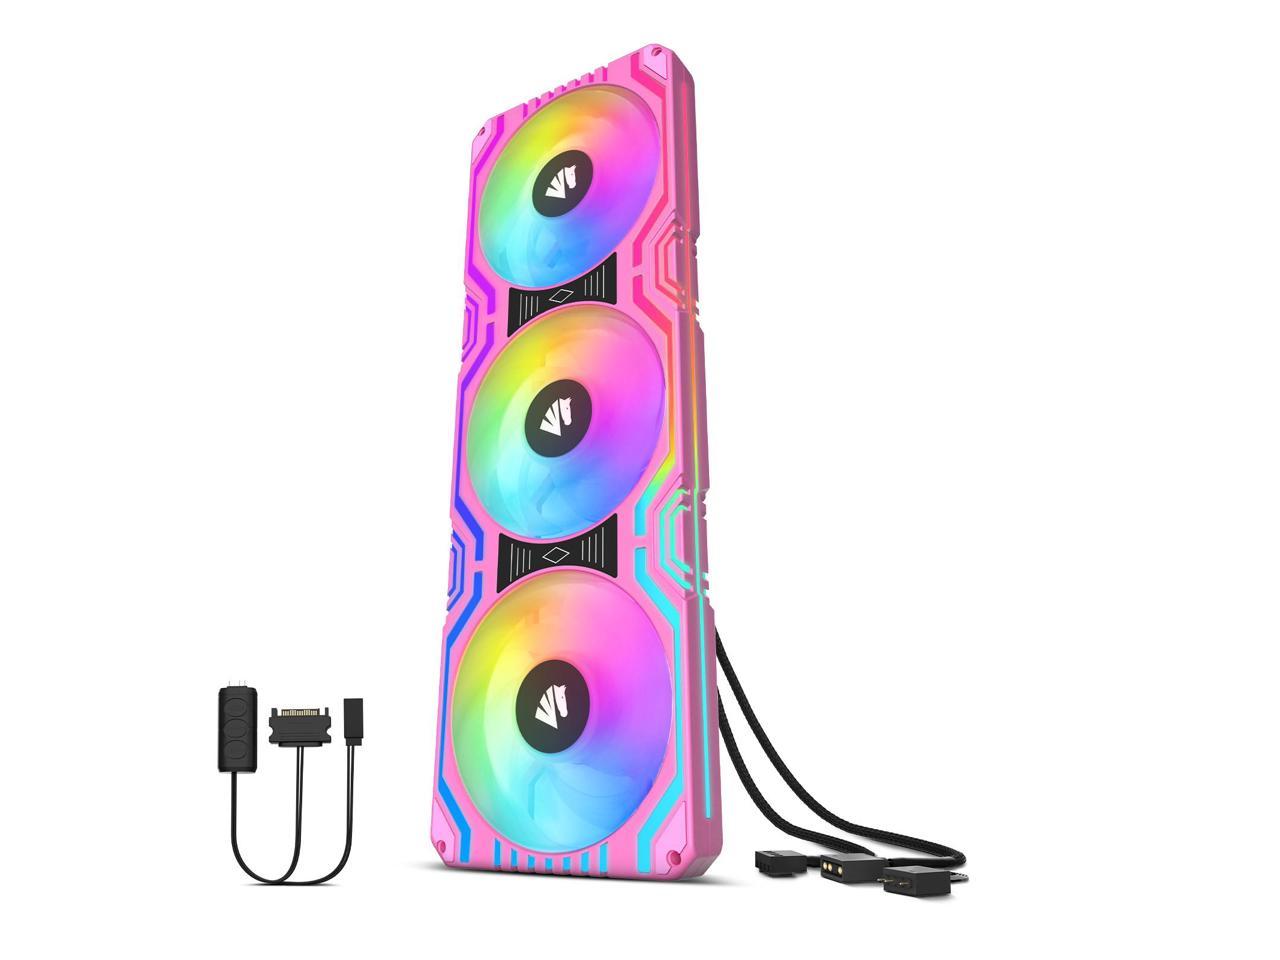 Asiahorse MATRIX-PINK 58 RGB LEDs 360MM All-in-One Square Frame Fan With MB Sync/Analog Controller , PWM Control Fan for Computer Case and Liquid Cooling System - Newegg.com